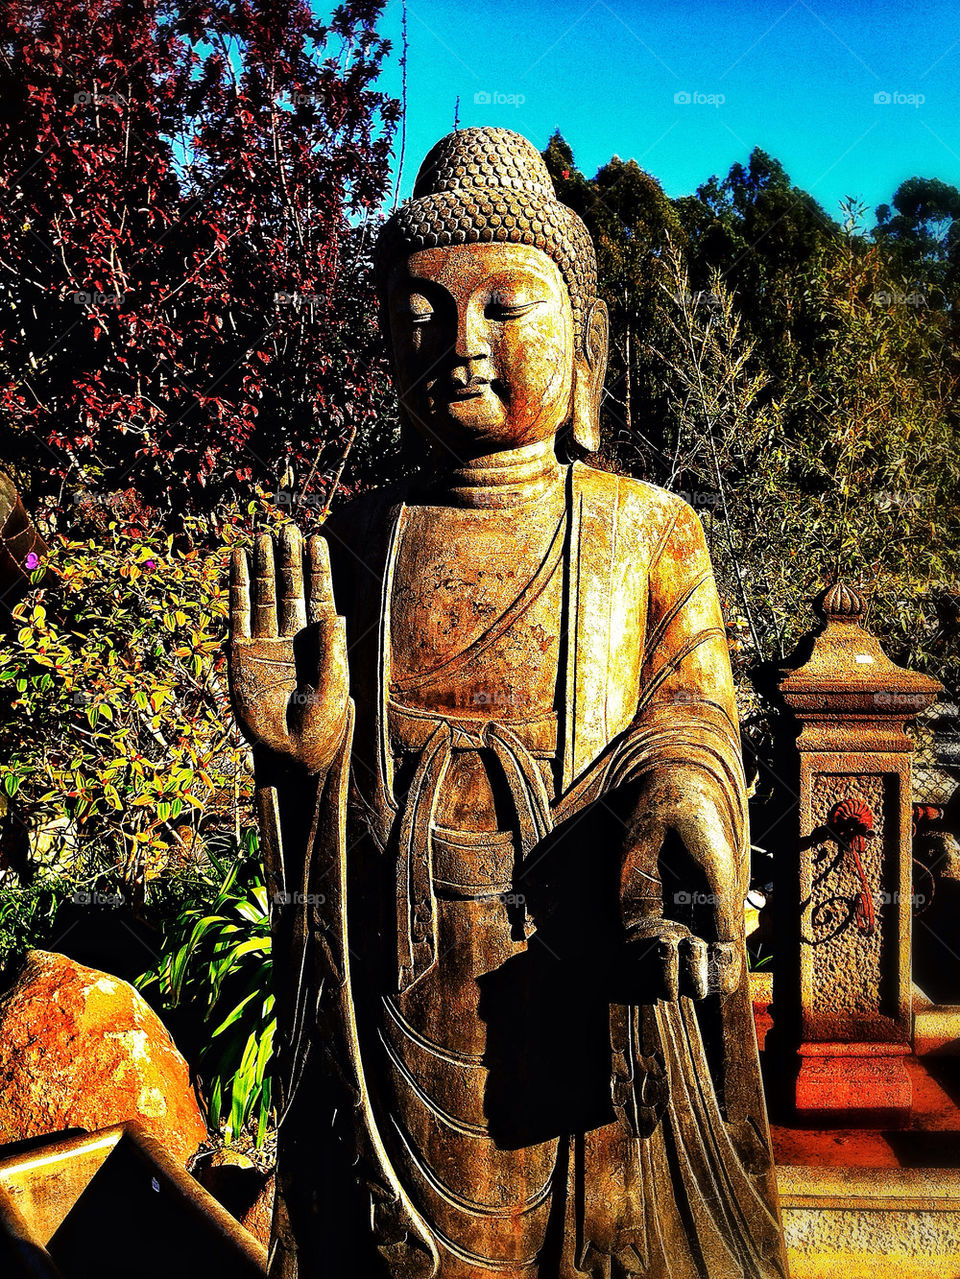 Marble statue of Buddha bodhisattva in a peaceful home garden